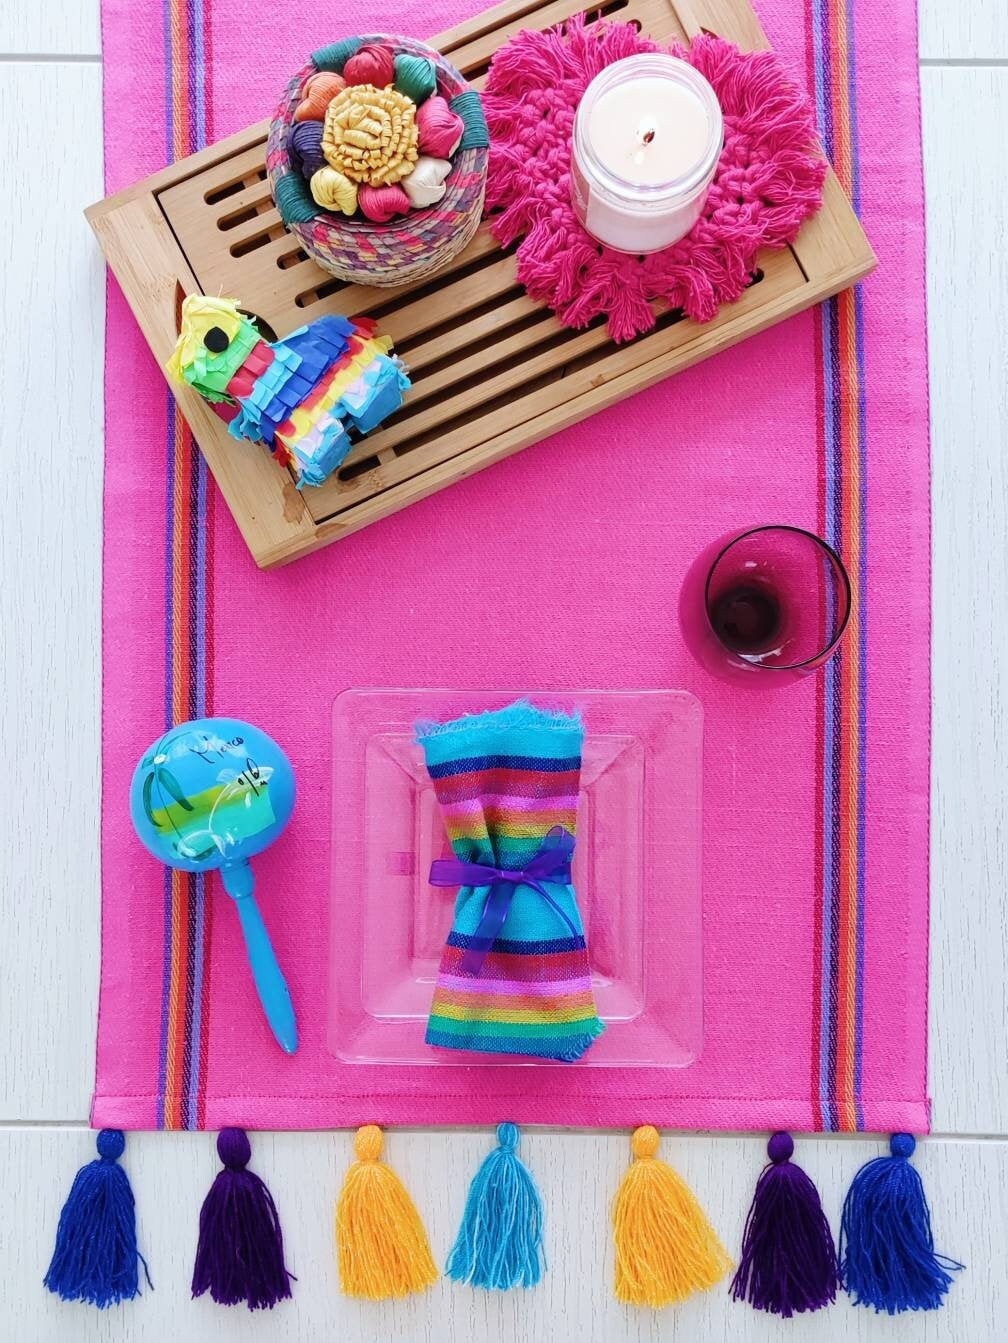 Fiesta Party Pack Serape Table Runner Party Supplies Birthday Baby